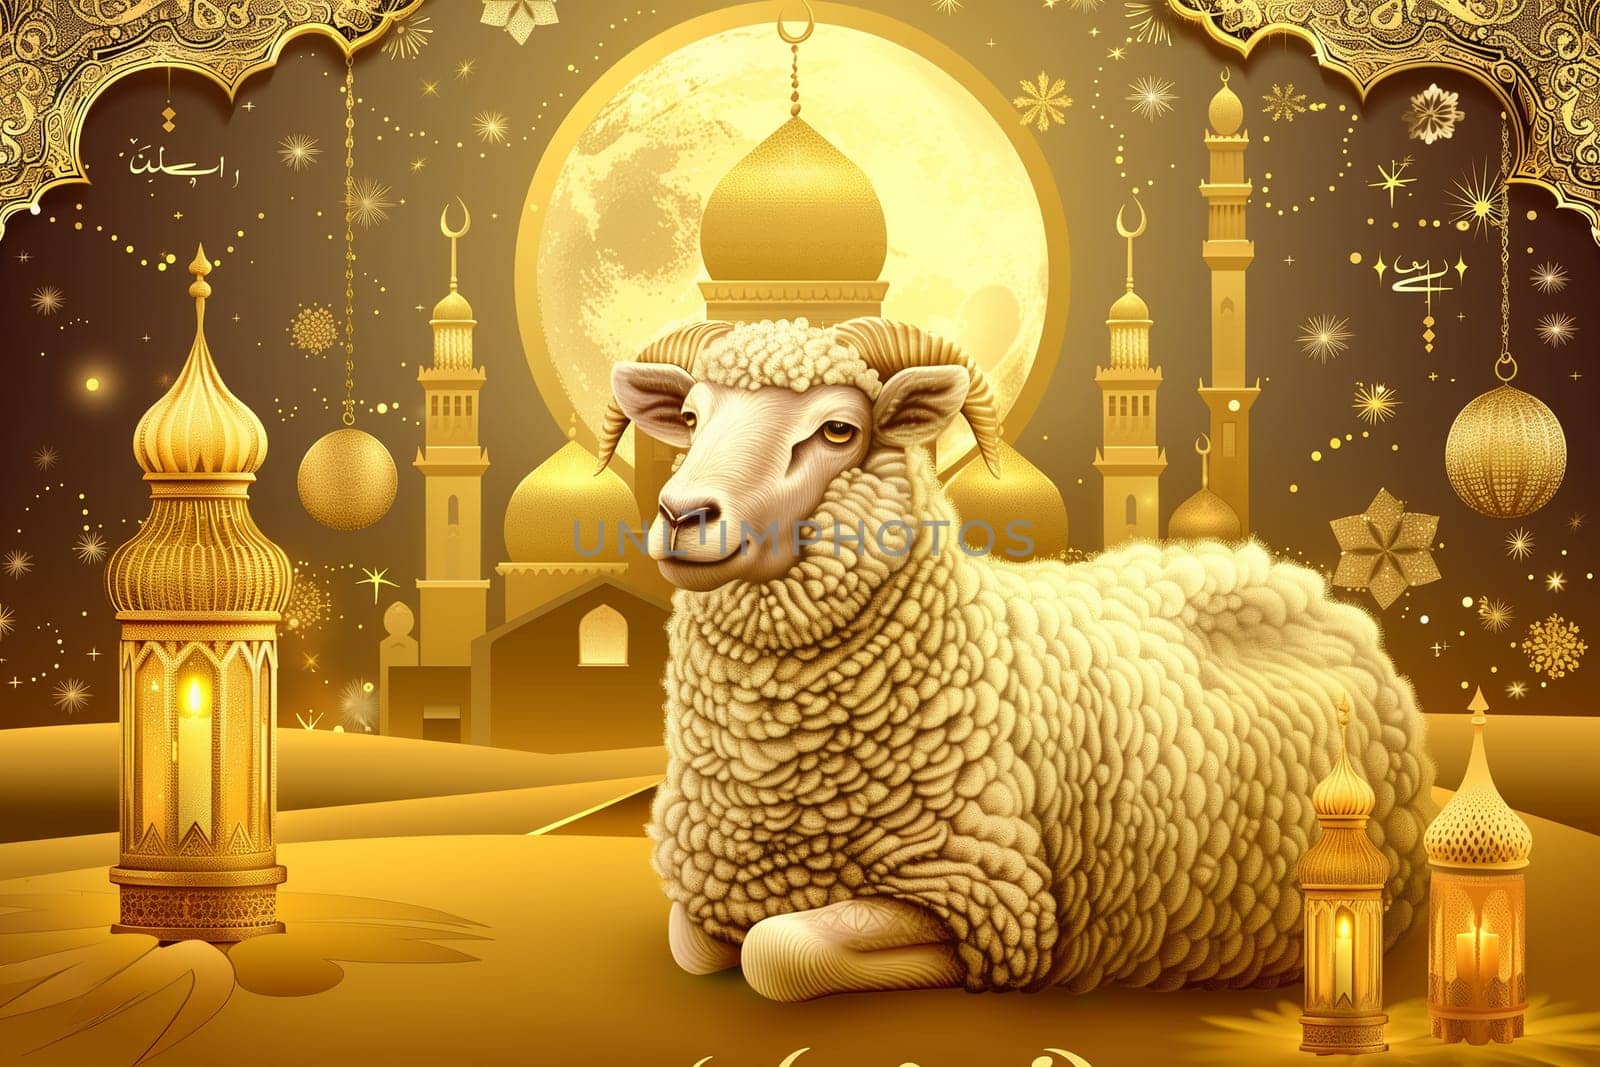 A serene sheep sits at the center of a Kurban Bayram celebration, flanked by golden lanterns and mosques against a night sky.